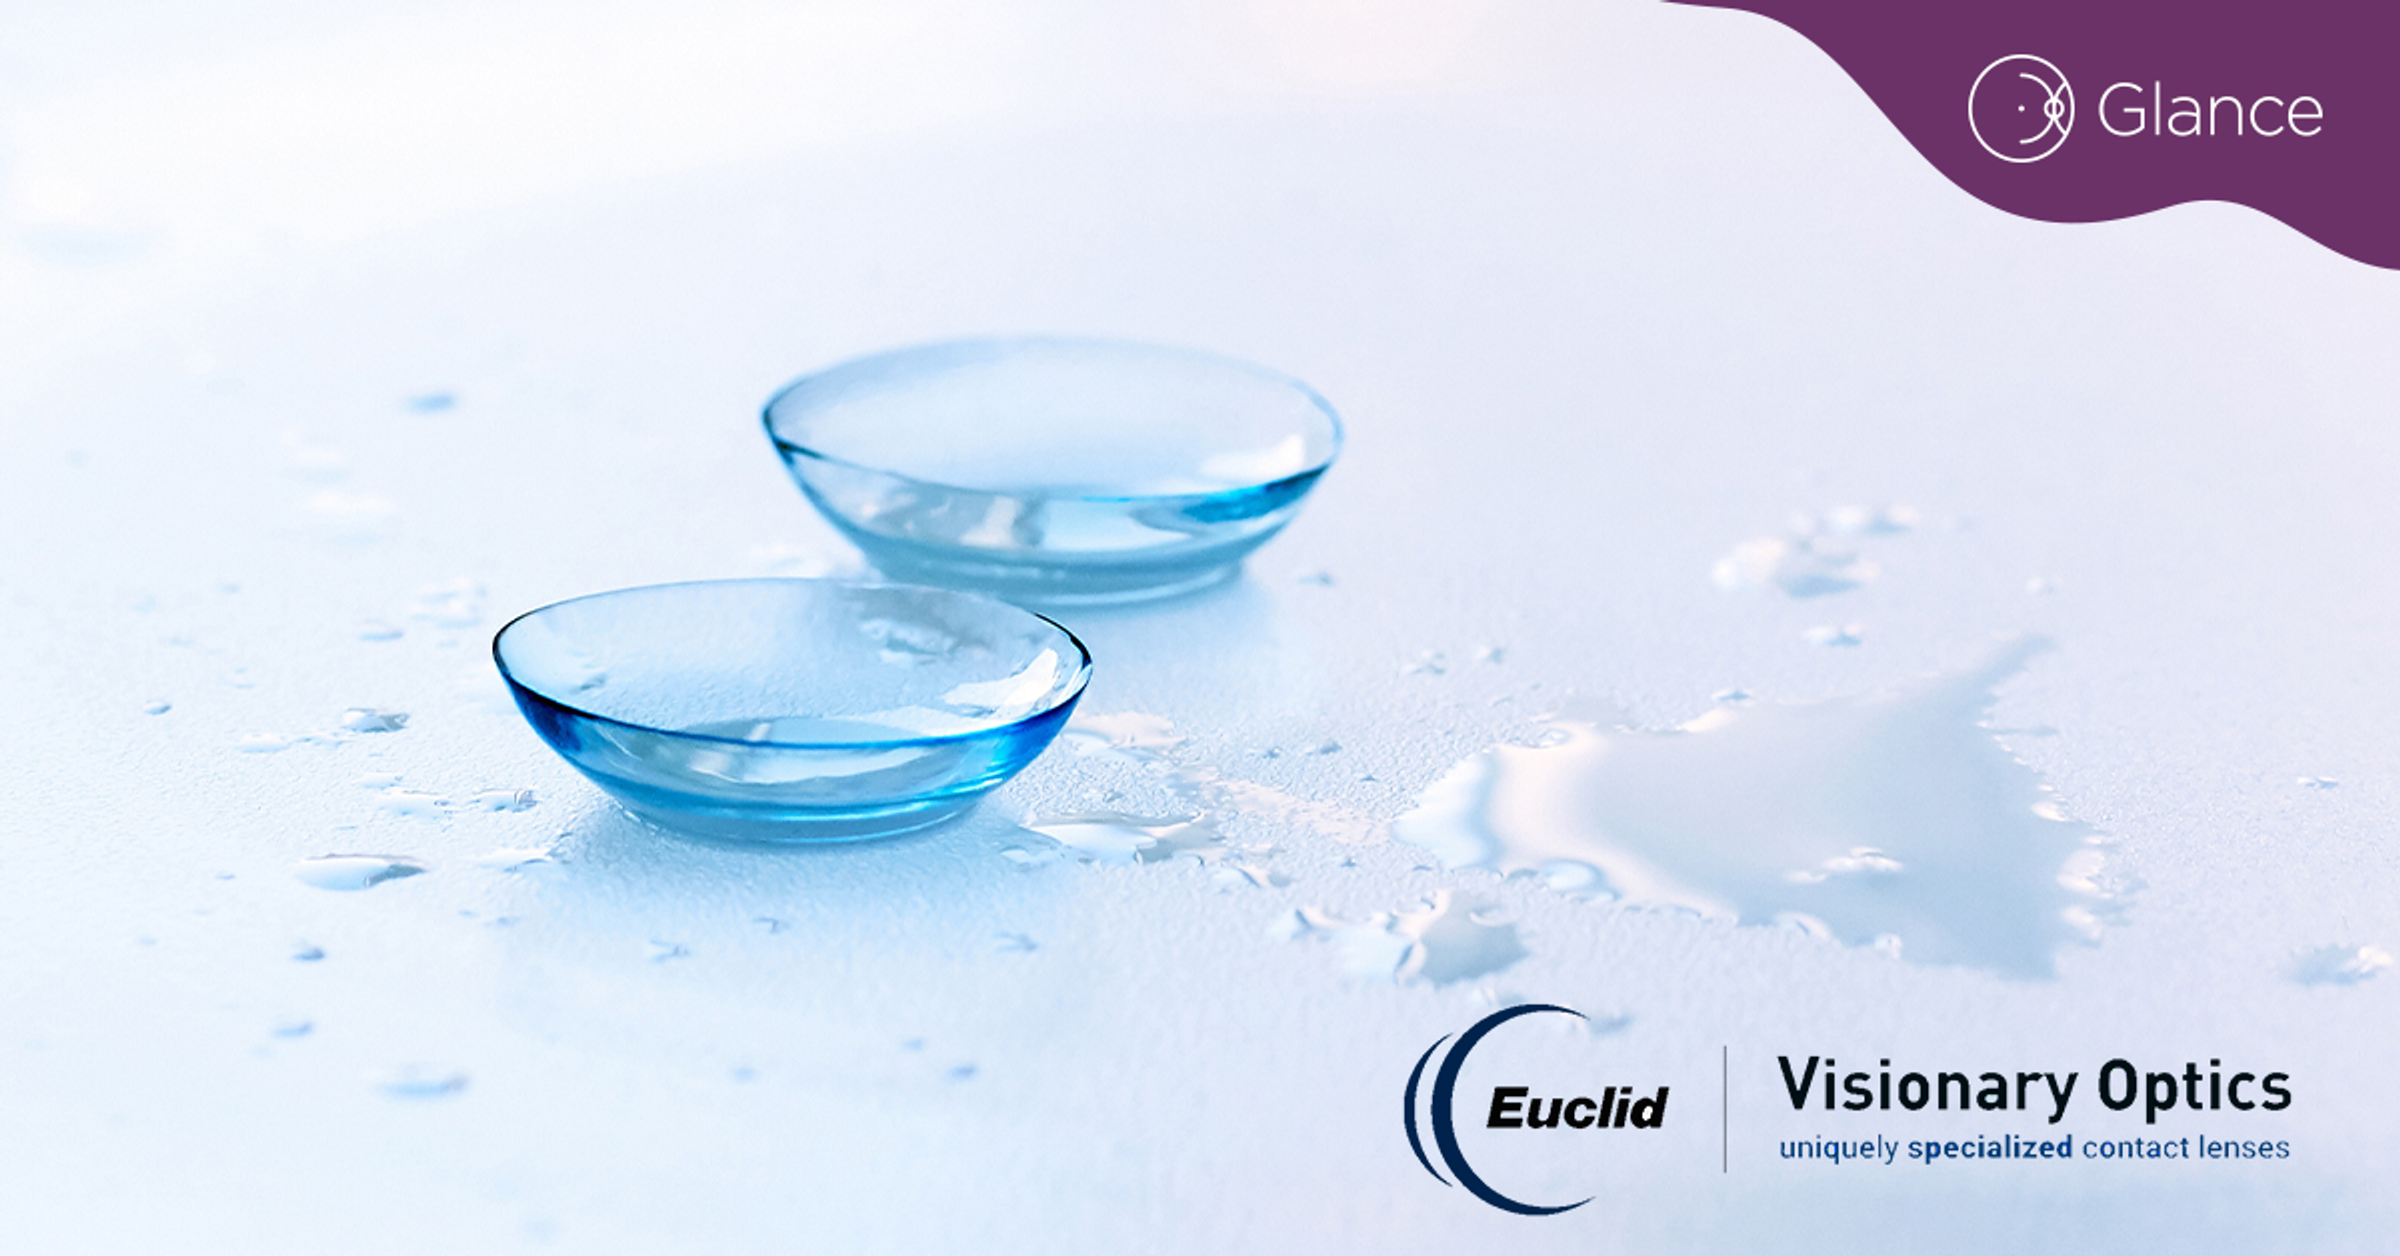 Euclid and Visionary Optics to host nationwide specialty contact lens forums